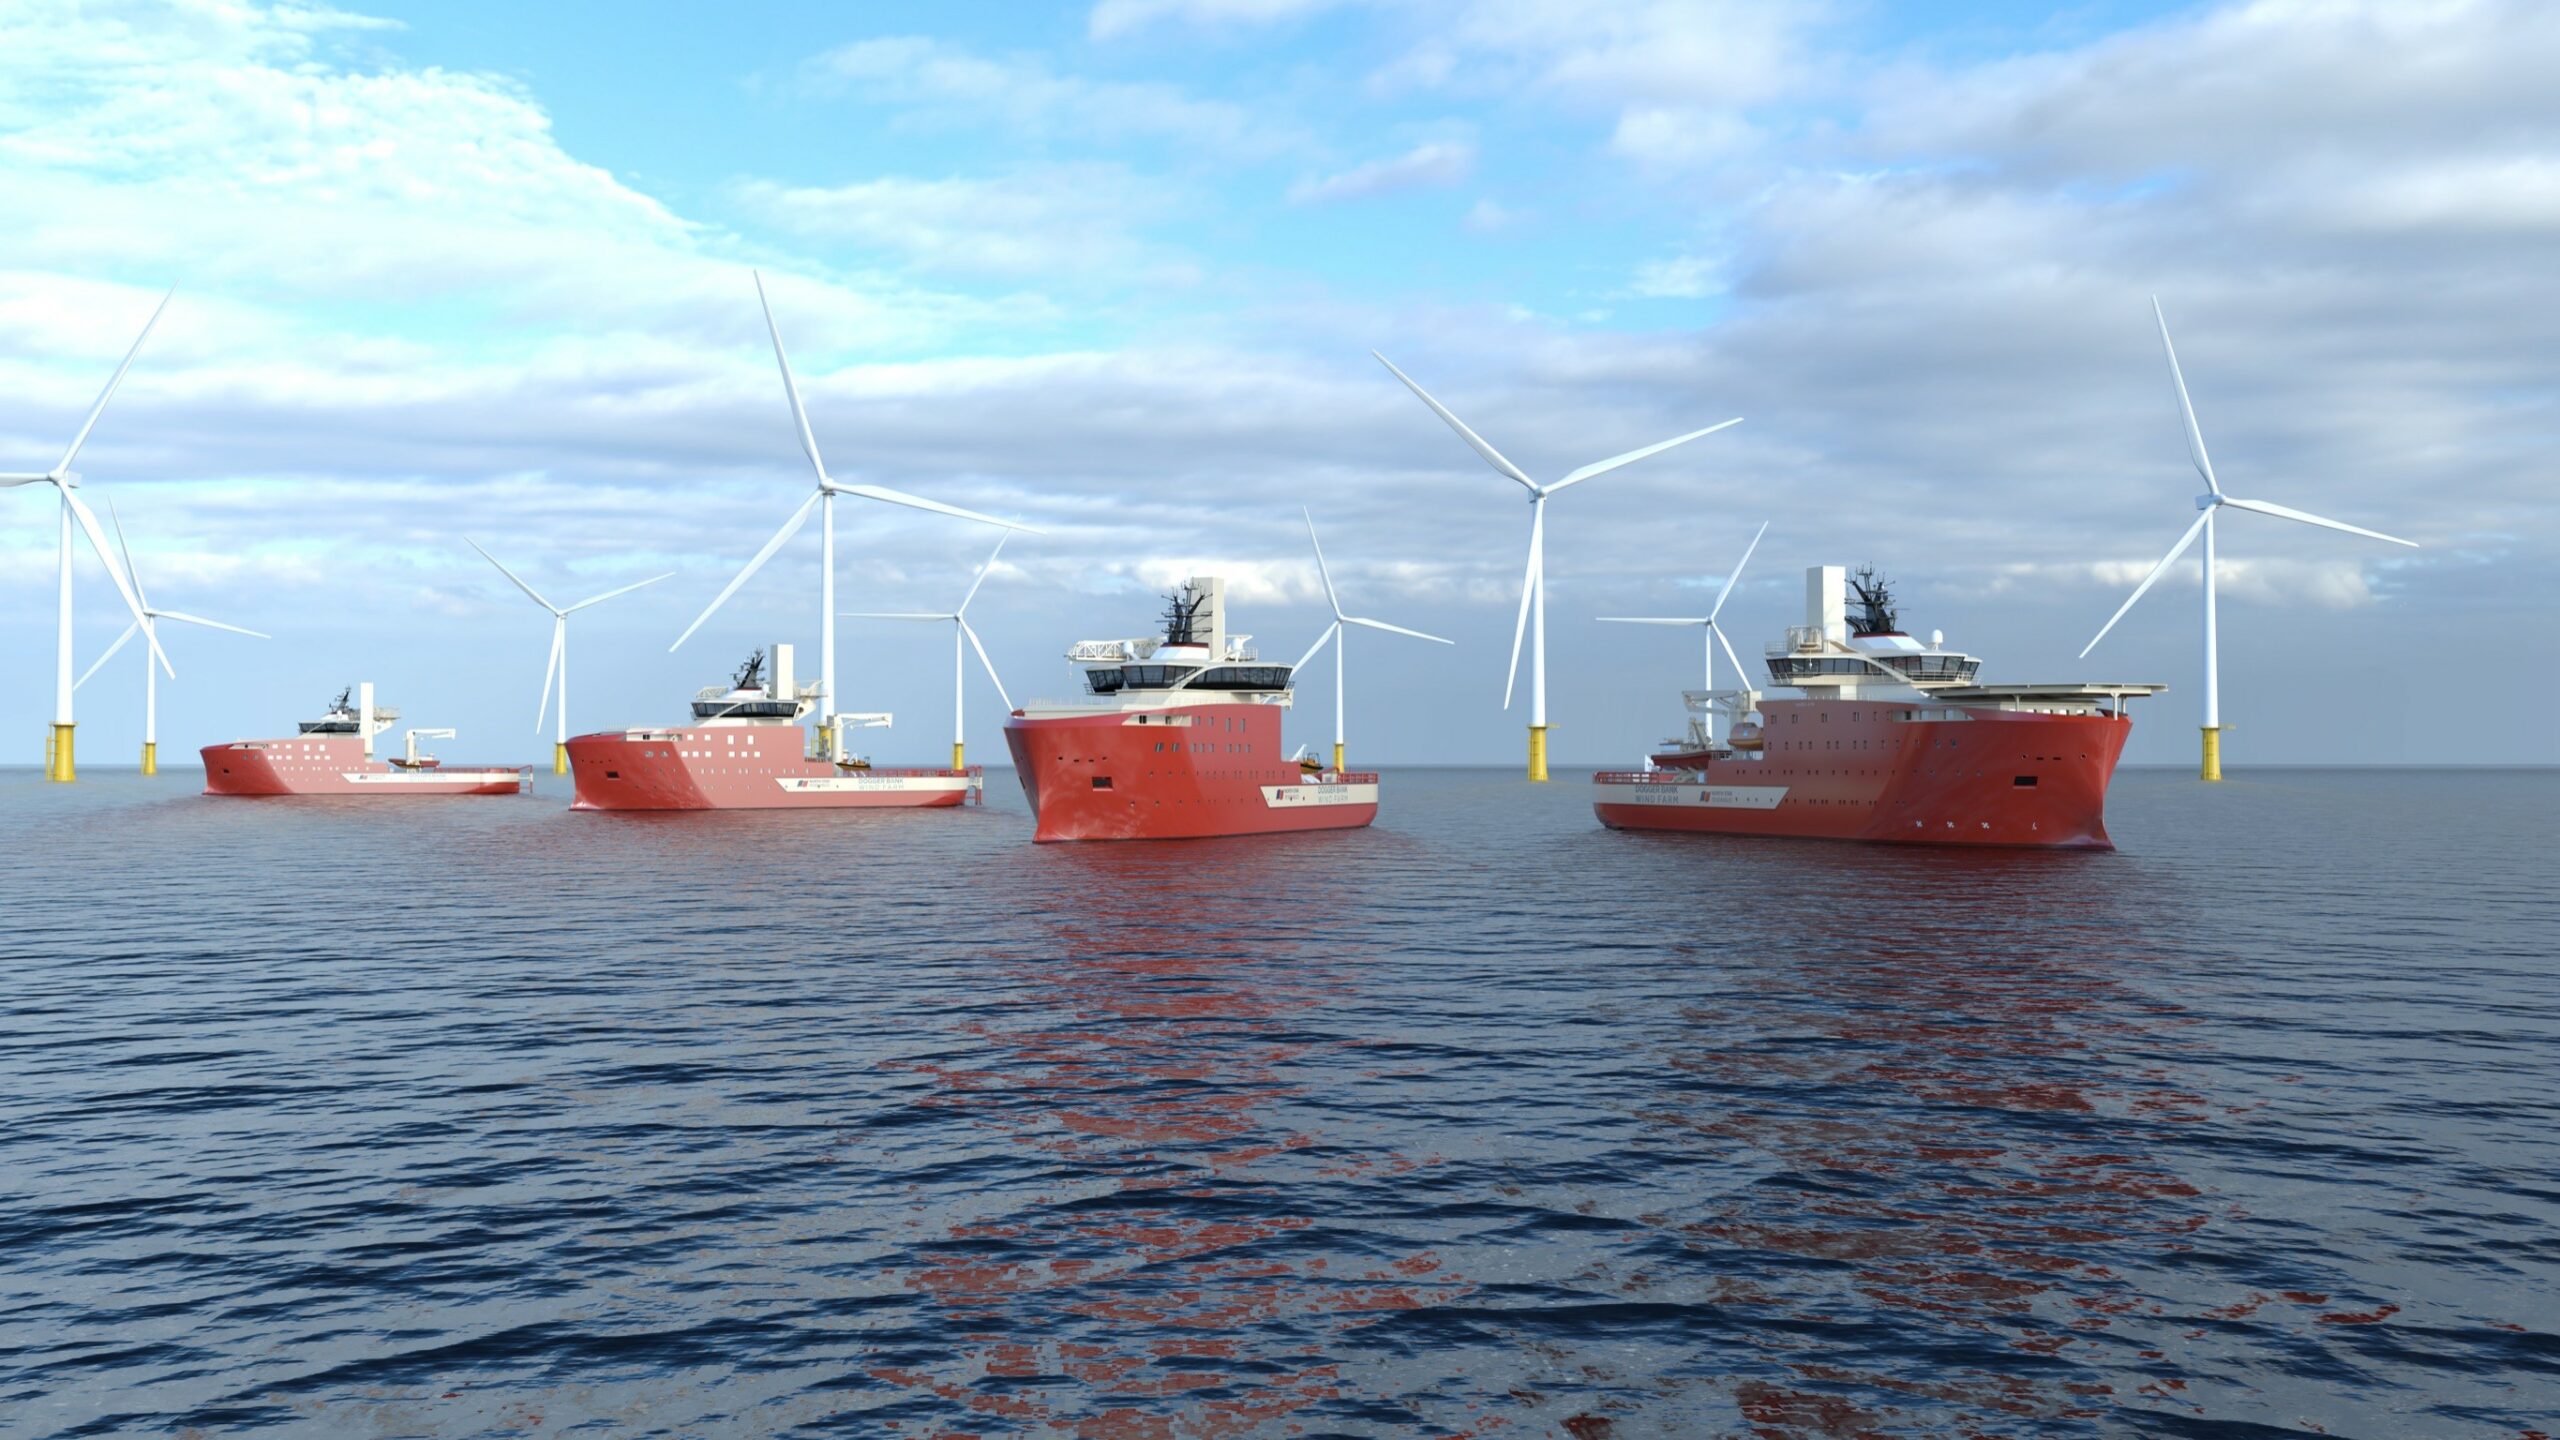 MEMBER NEWS: North Star wins £90m contract to complete vessel package for Dogger Bank Wind Farm